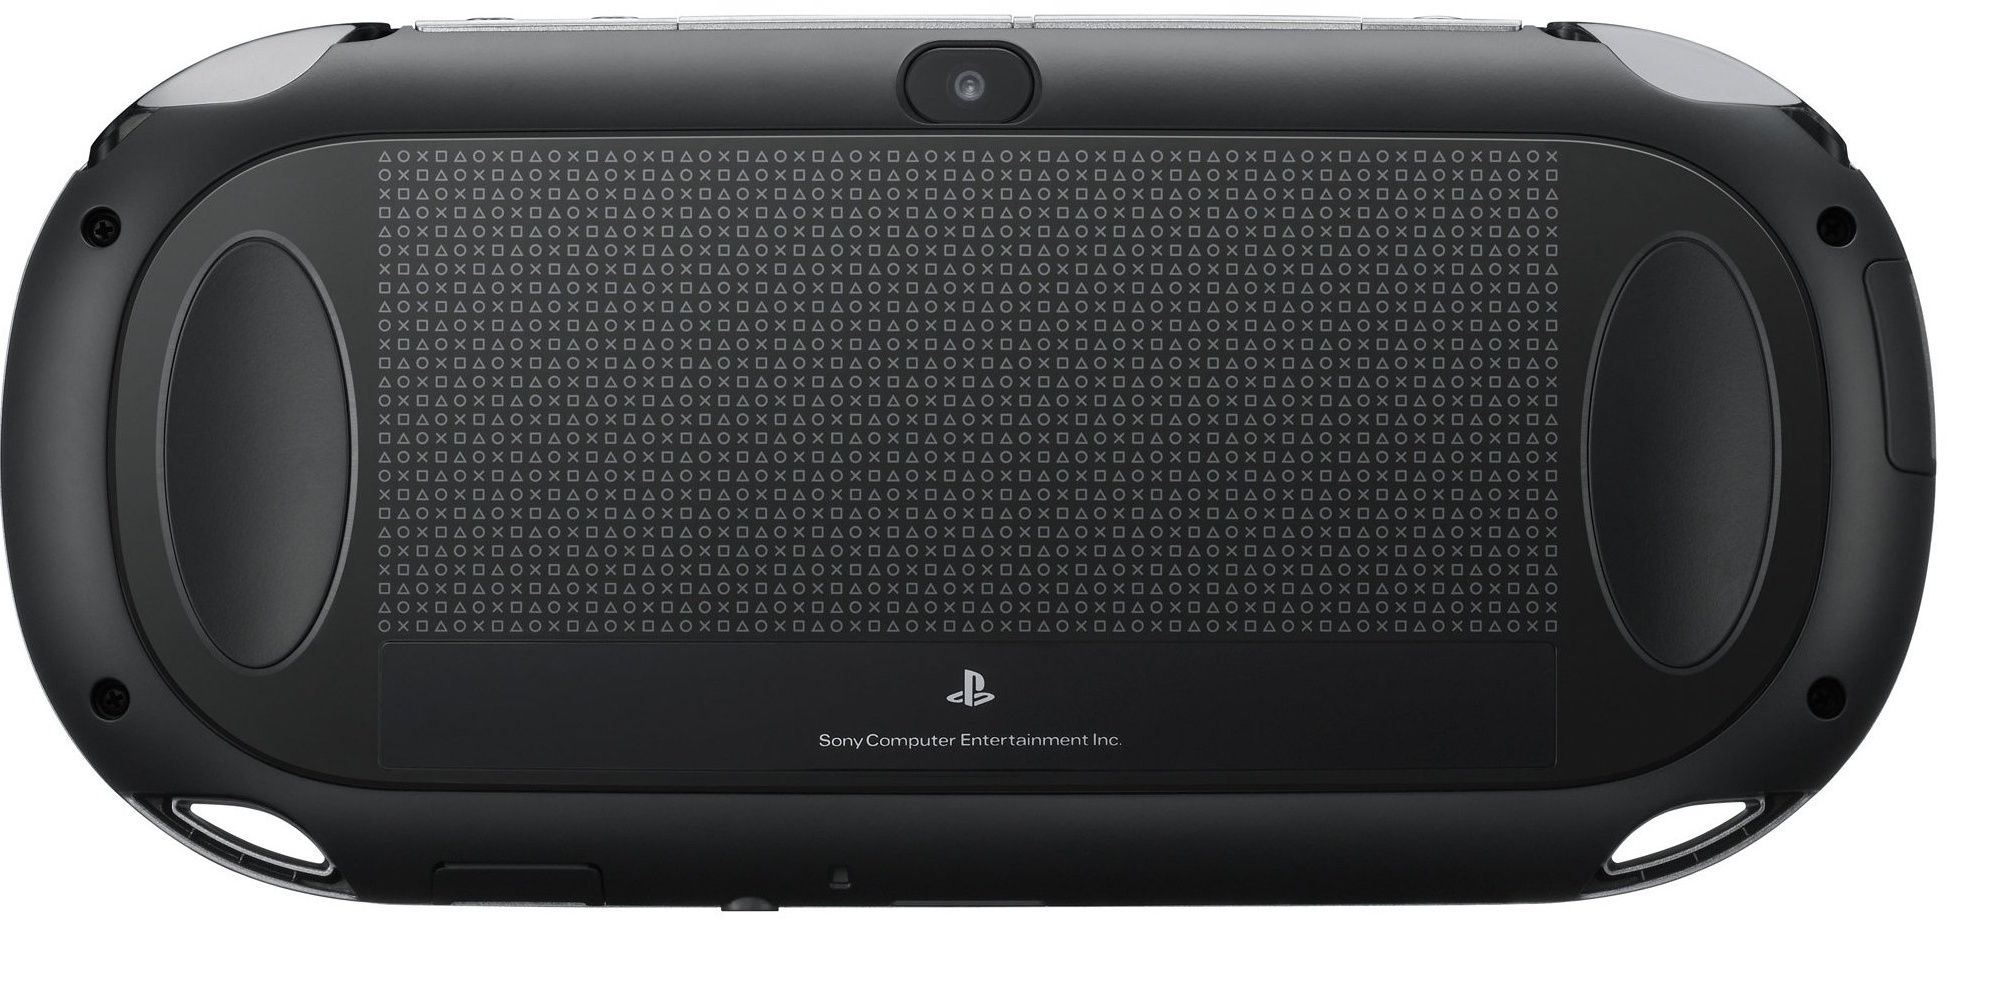 Back view of the PlayStation Vita